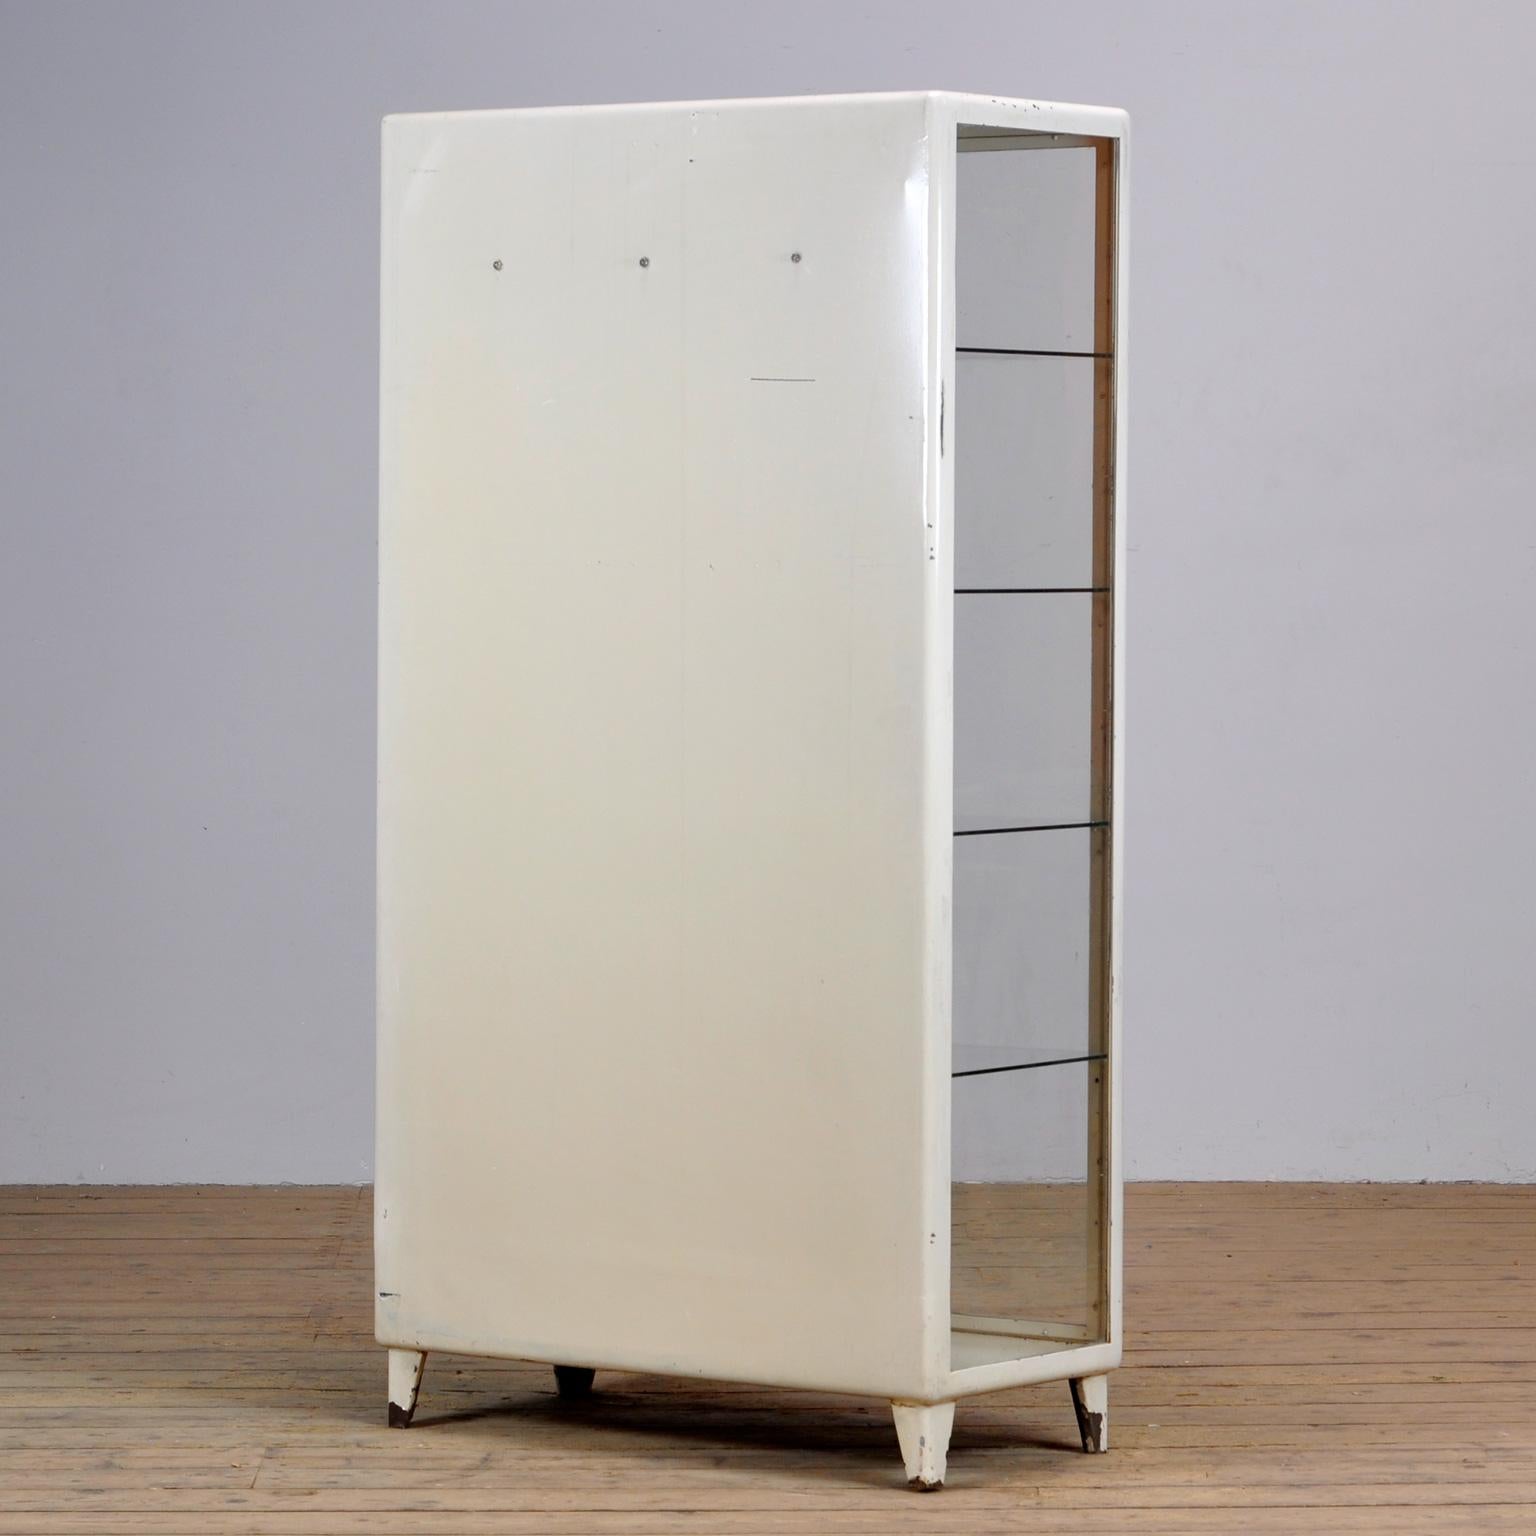 Vintage Steel And Glass Medical Cabinet, 1960s For Sale 6